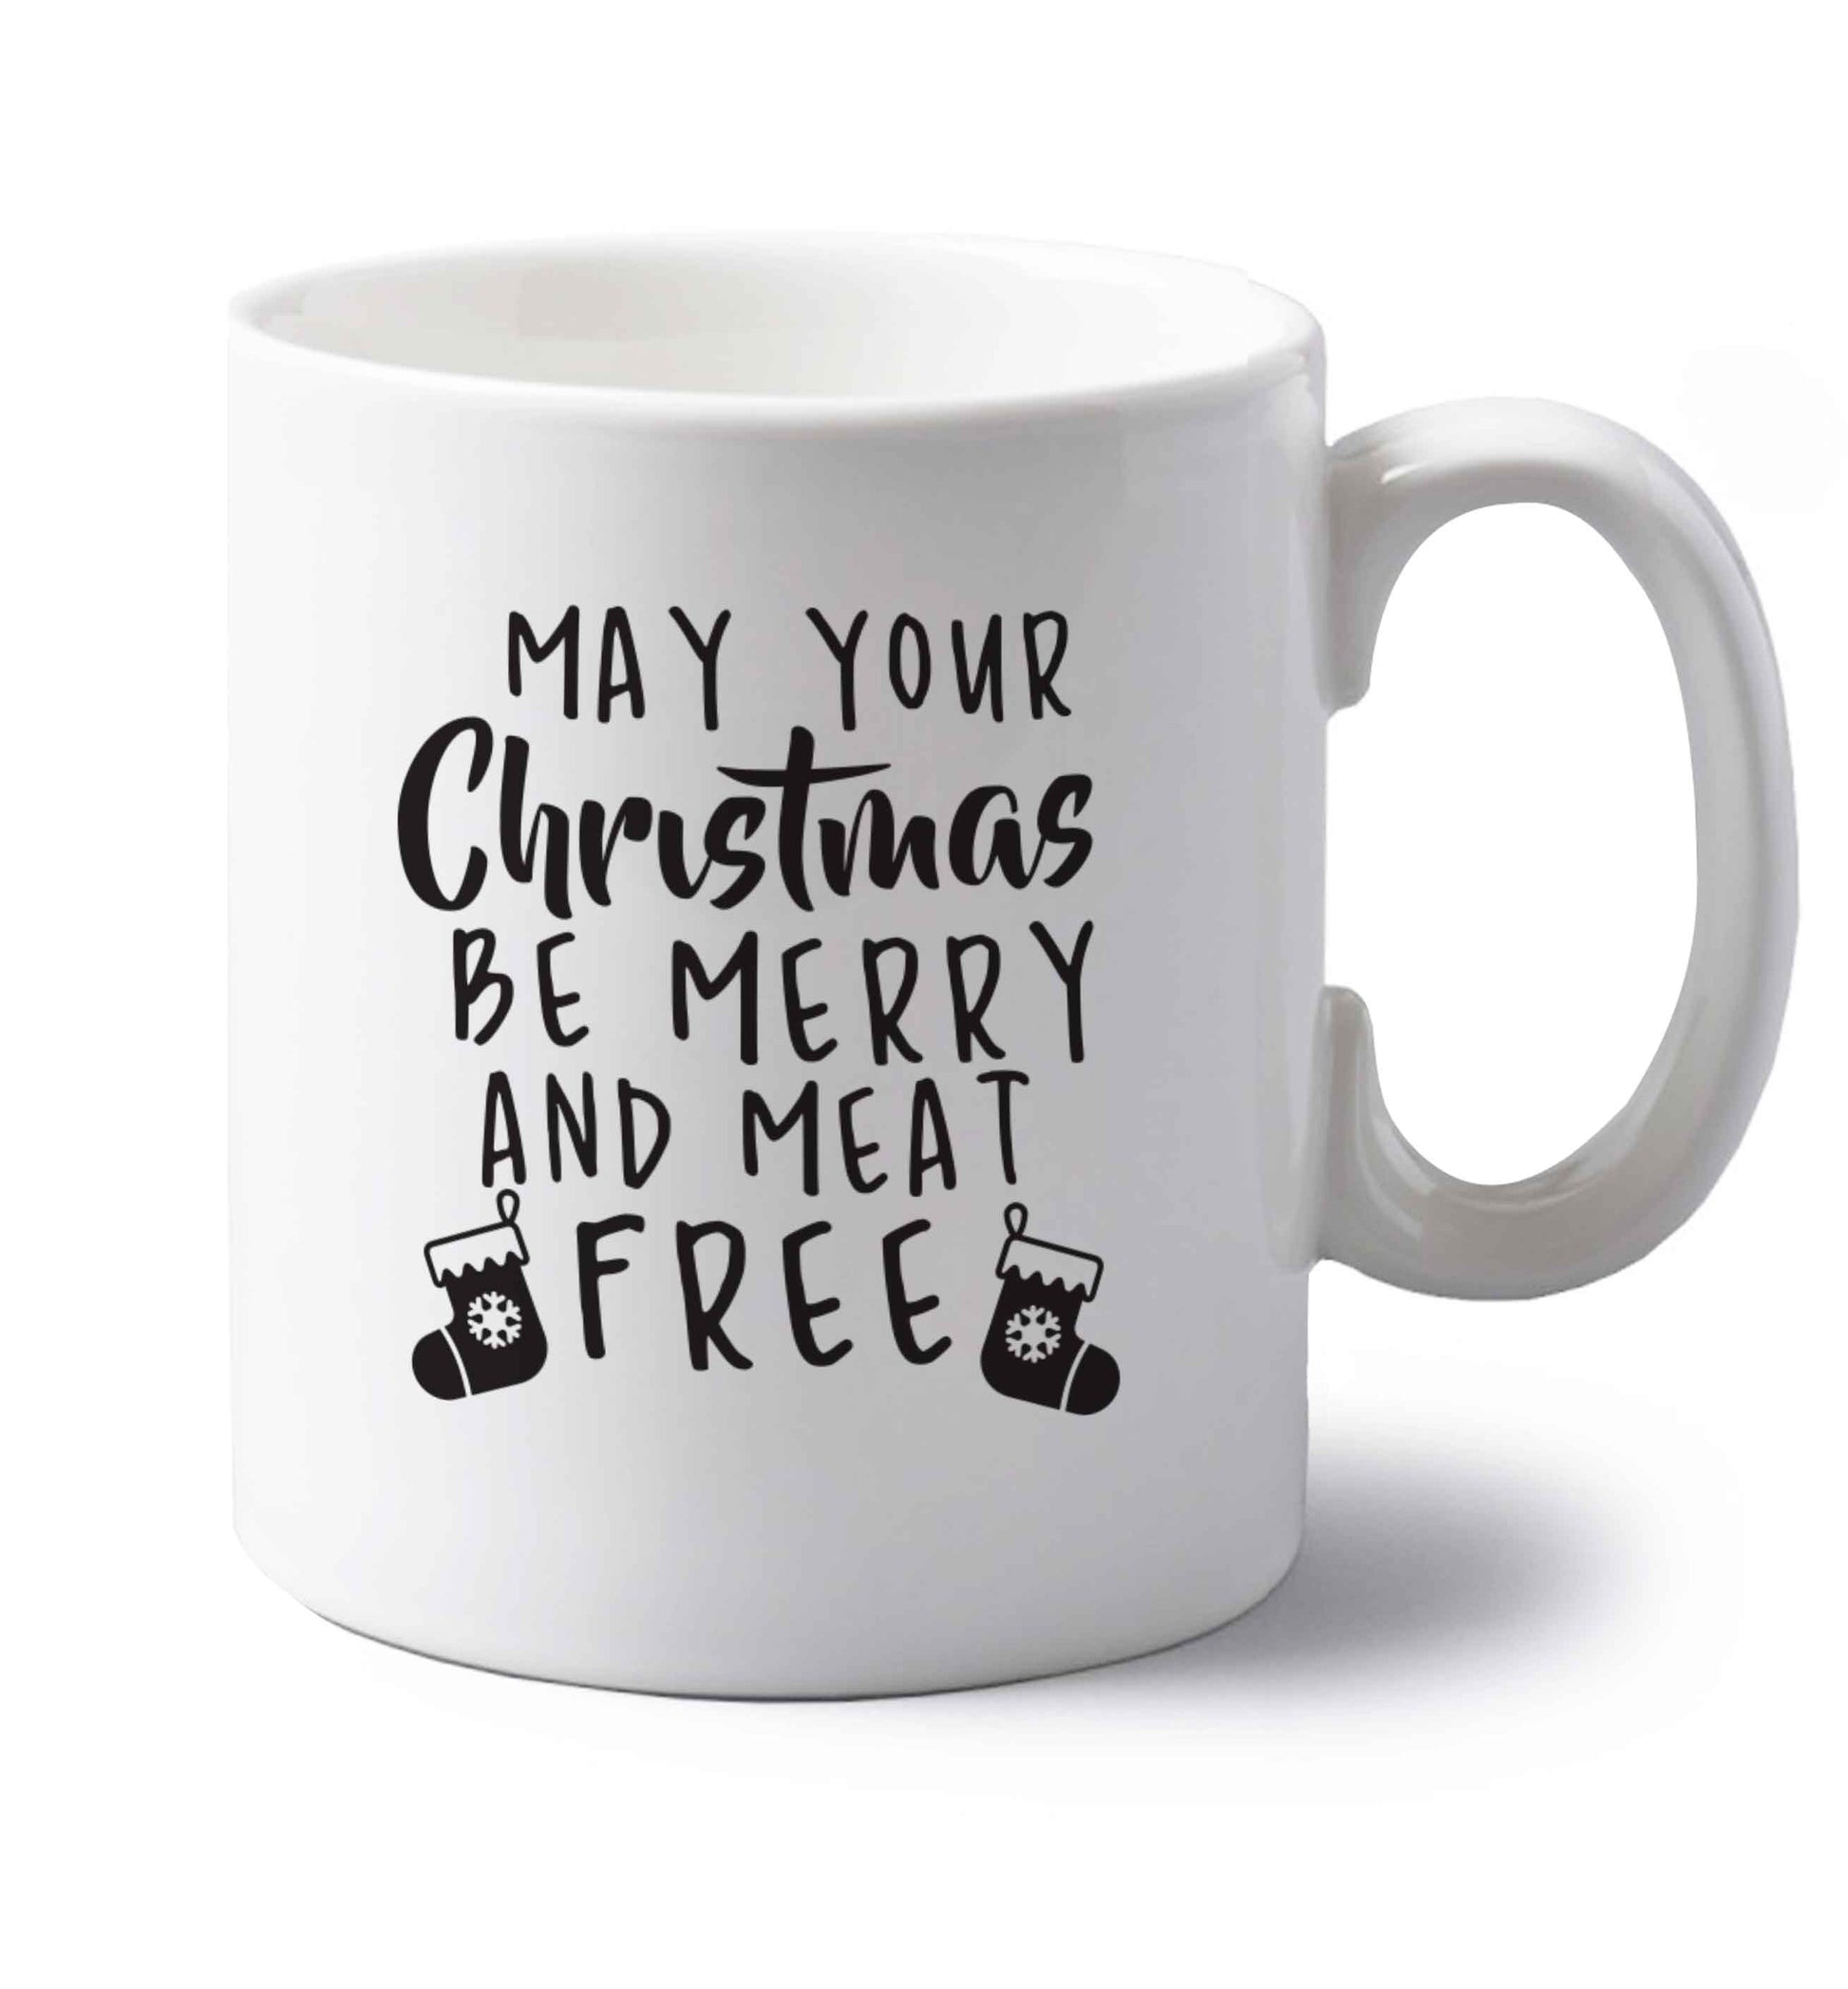 May your Christmas be merry and meat free left handed white ceramic mug 